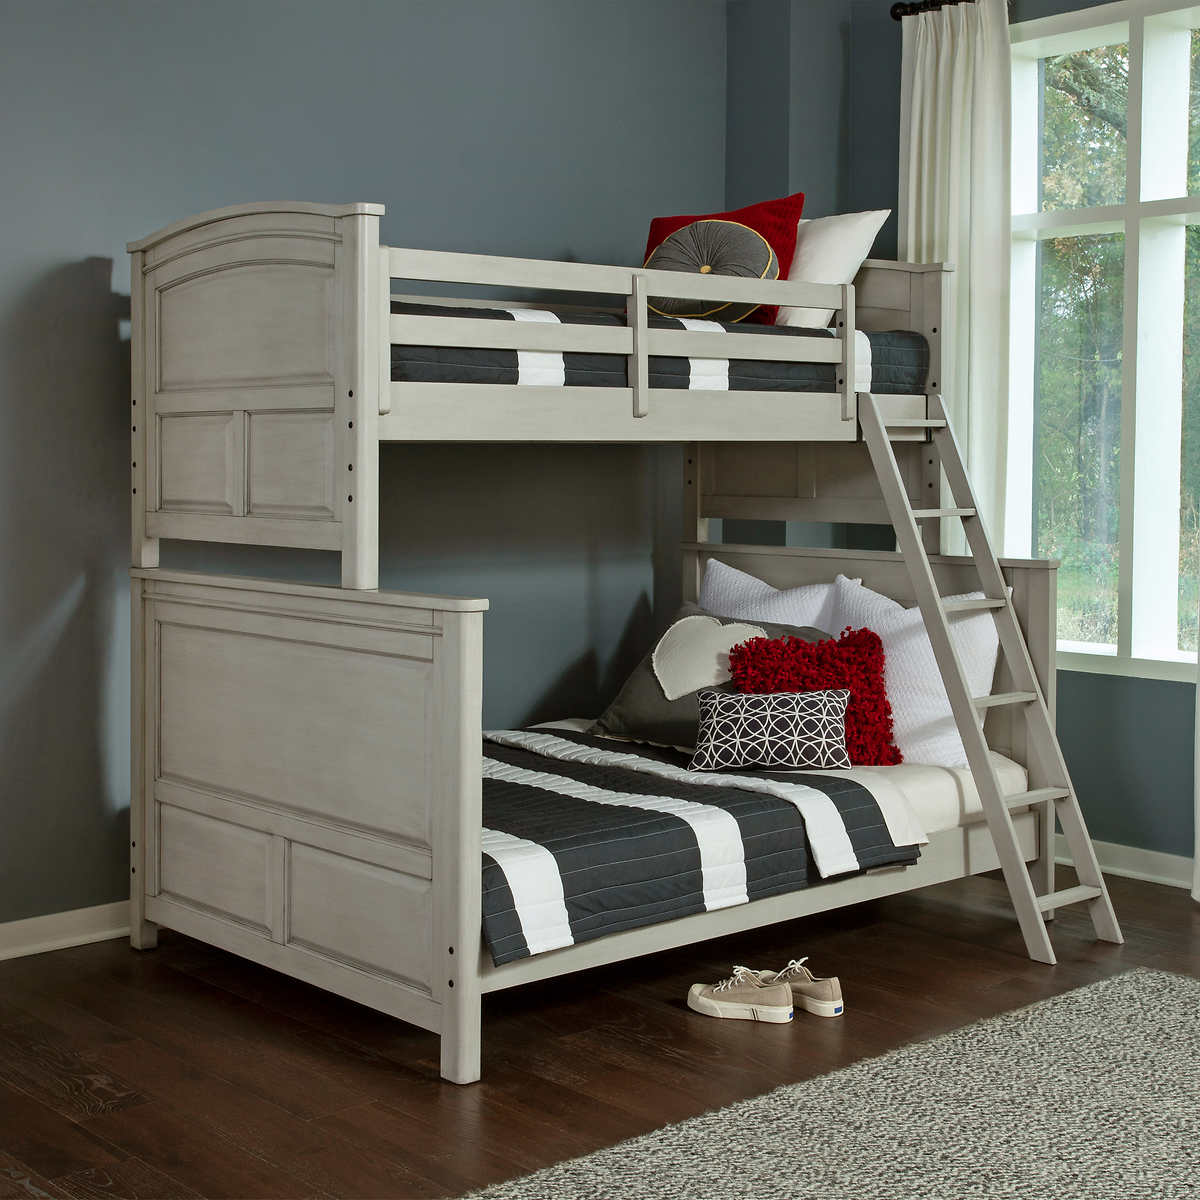 Wingate Twin Over Full Bunk Bed Costco, Do Bunk Beds Have A Weight Limit